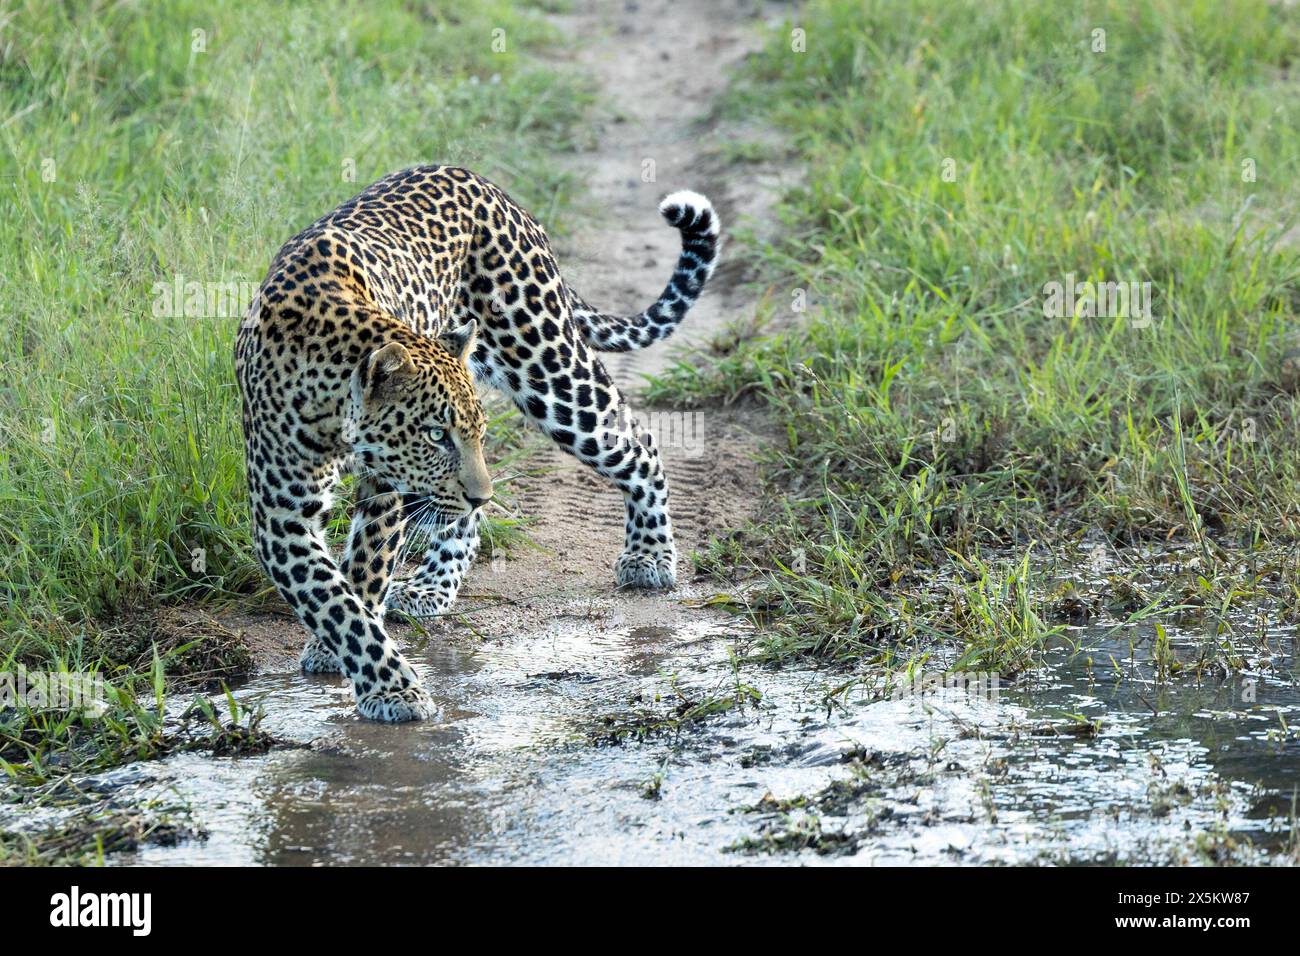 A male leopard, Panthera pardus, walks through a stream of water. Stock Photo